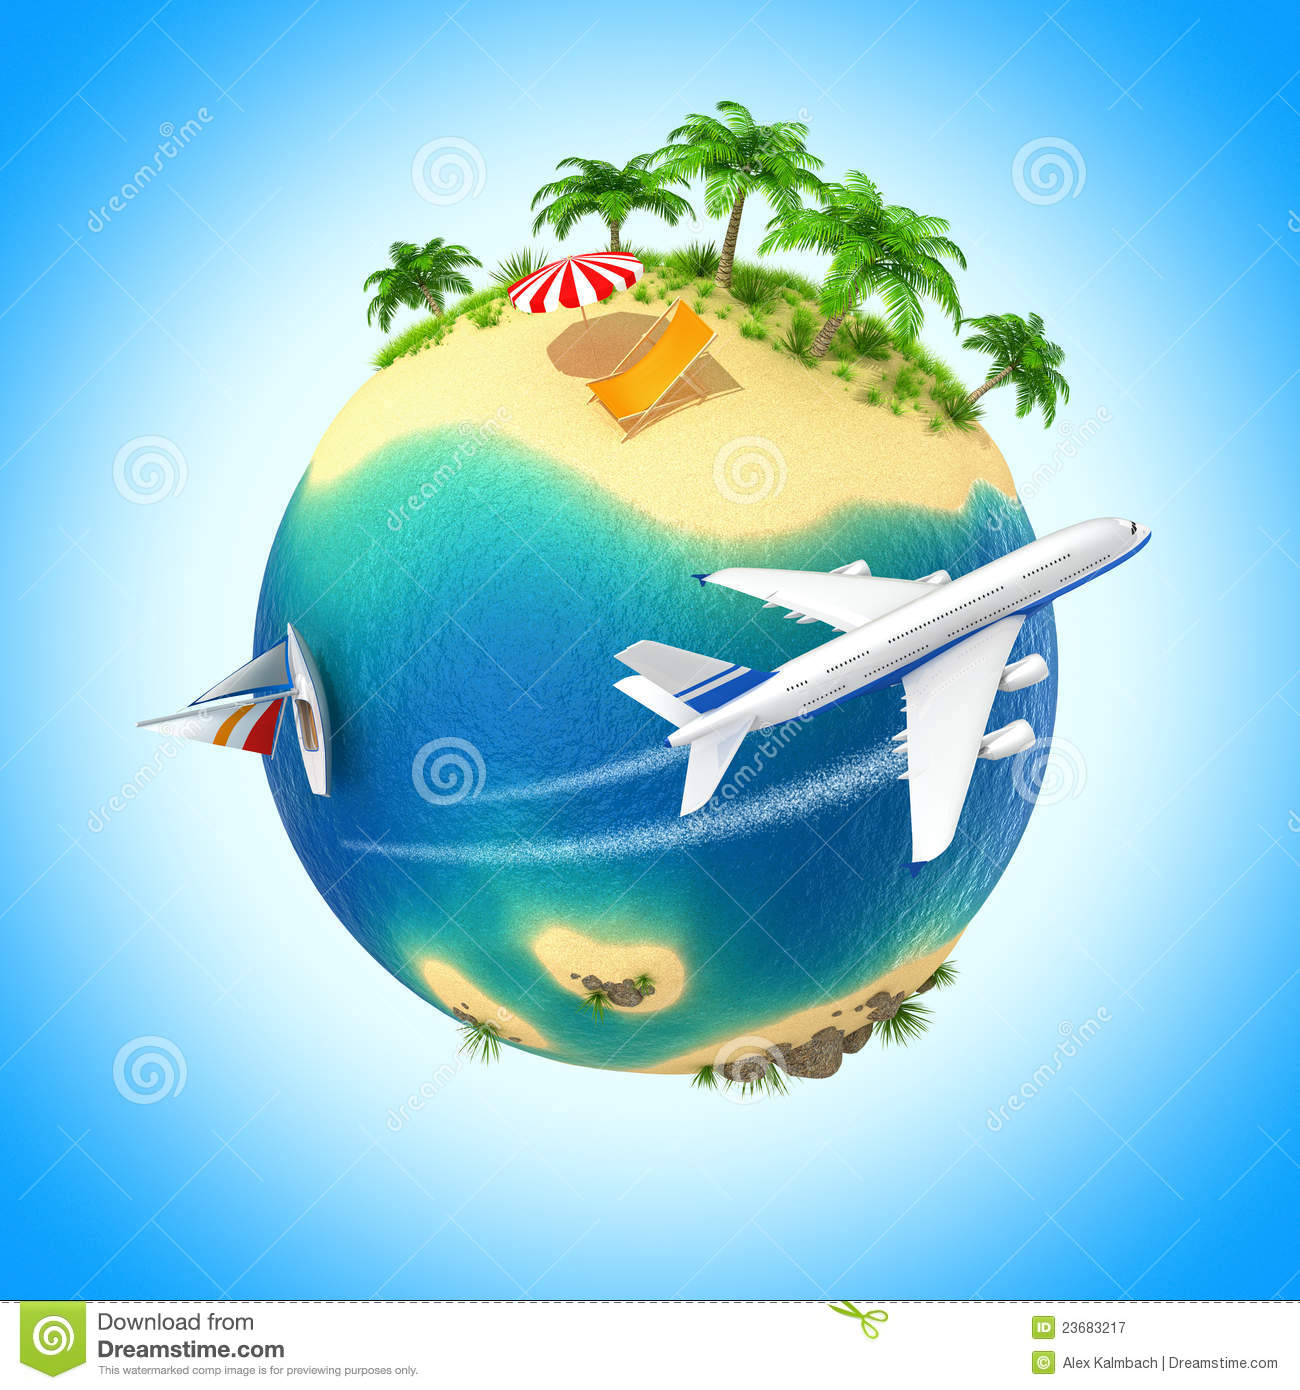 Tropical island clipart - Clipground